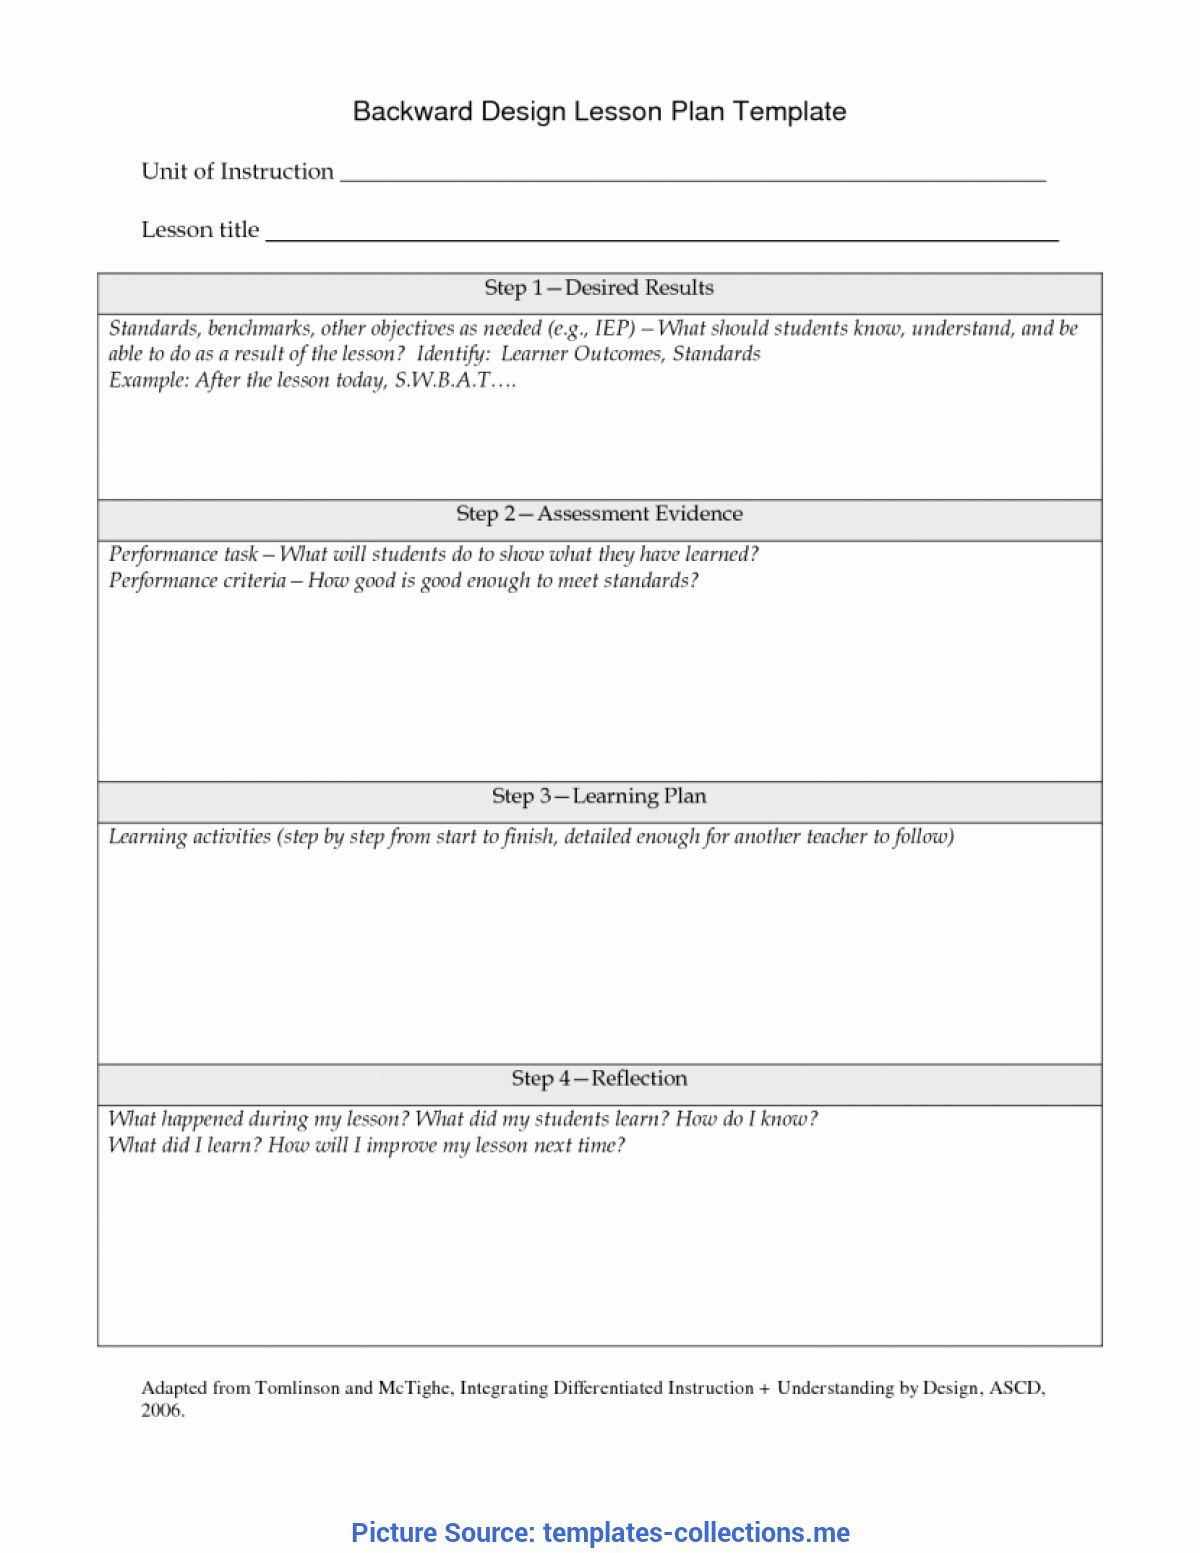 Differentiated Lesson Plan Example 25 Differentiated Lesson Plan Template In 2020